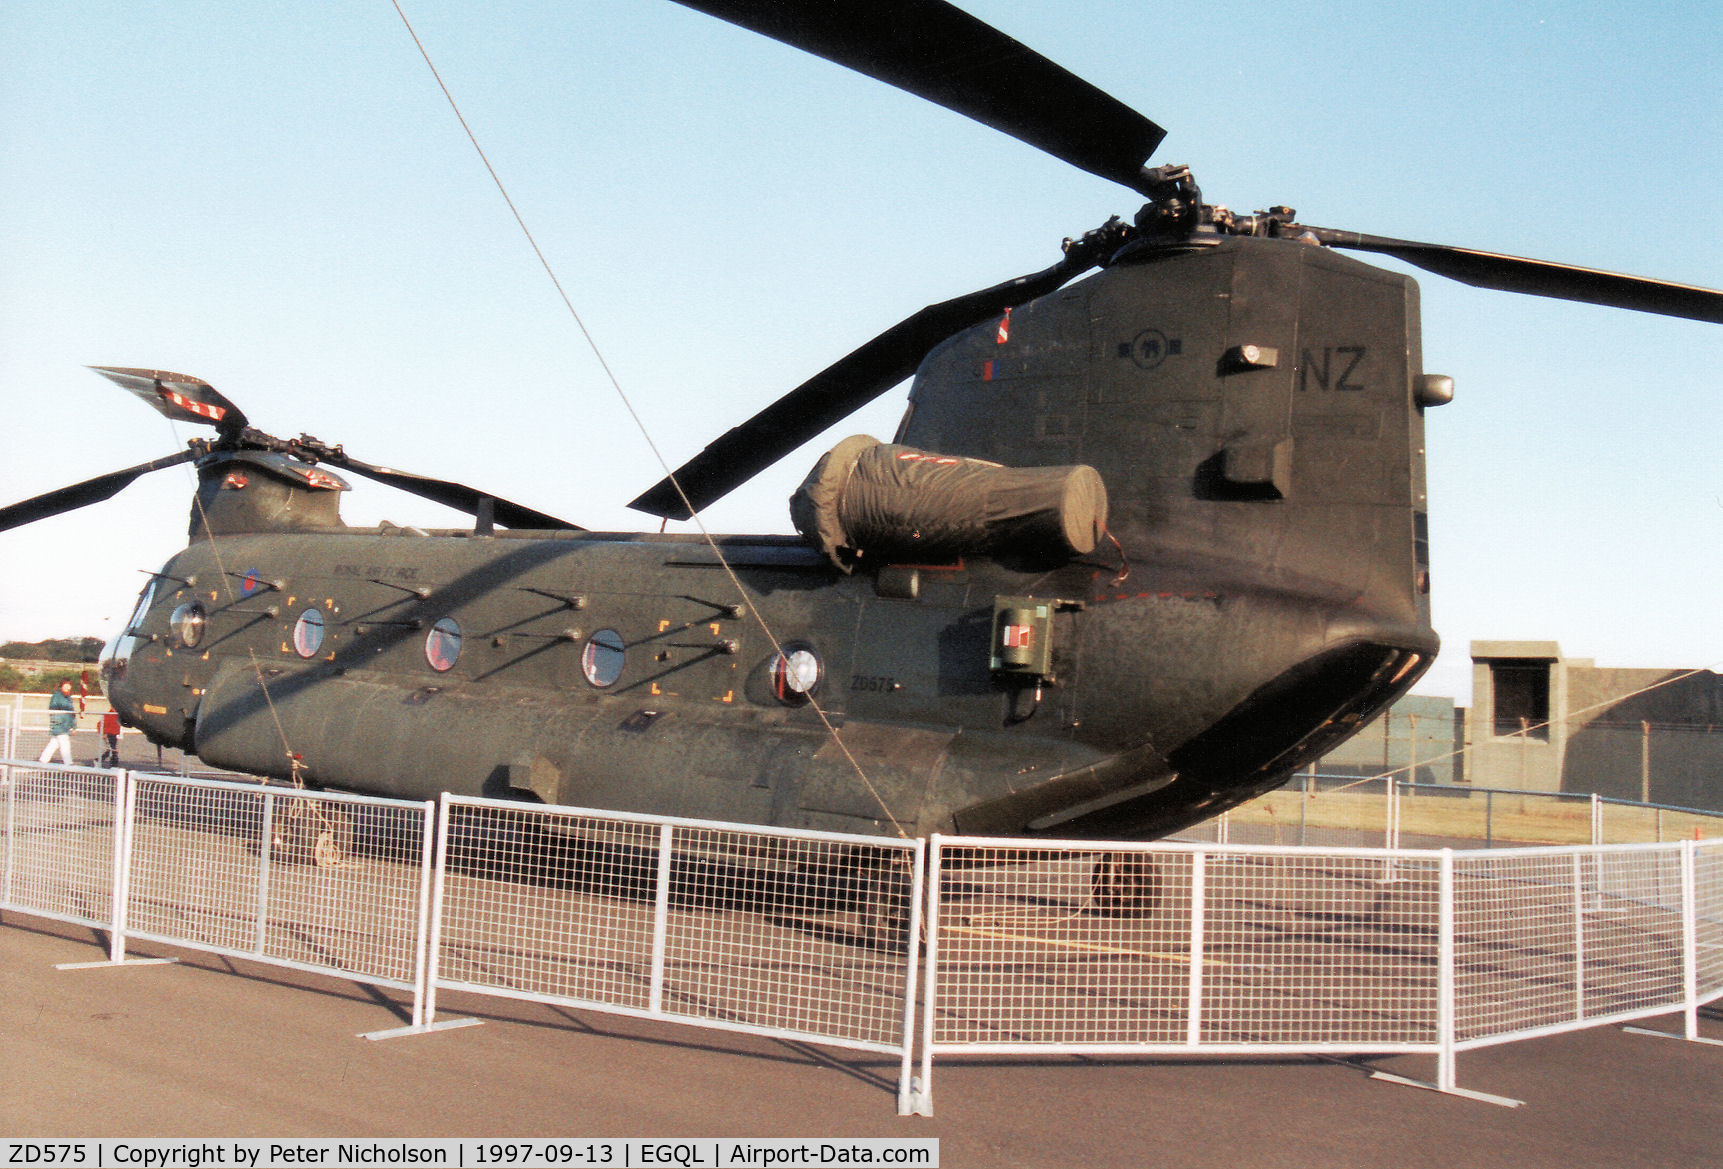 ZD575, Boeing Vertol Chinook HC.2 C/N M/A035/B-867/M7023), Chinook HC.2, callsign ODM 67, of 27[Reserve] Squadron based at RAF Odiham on display at the 1997 RAF Leuchars Airshow.